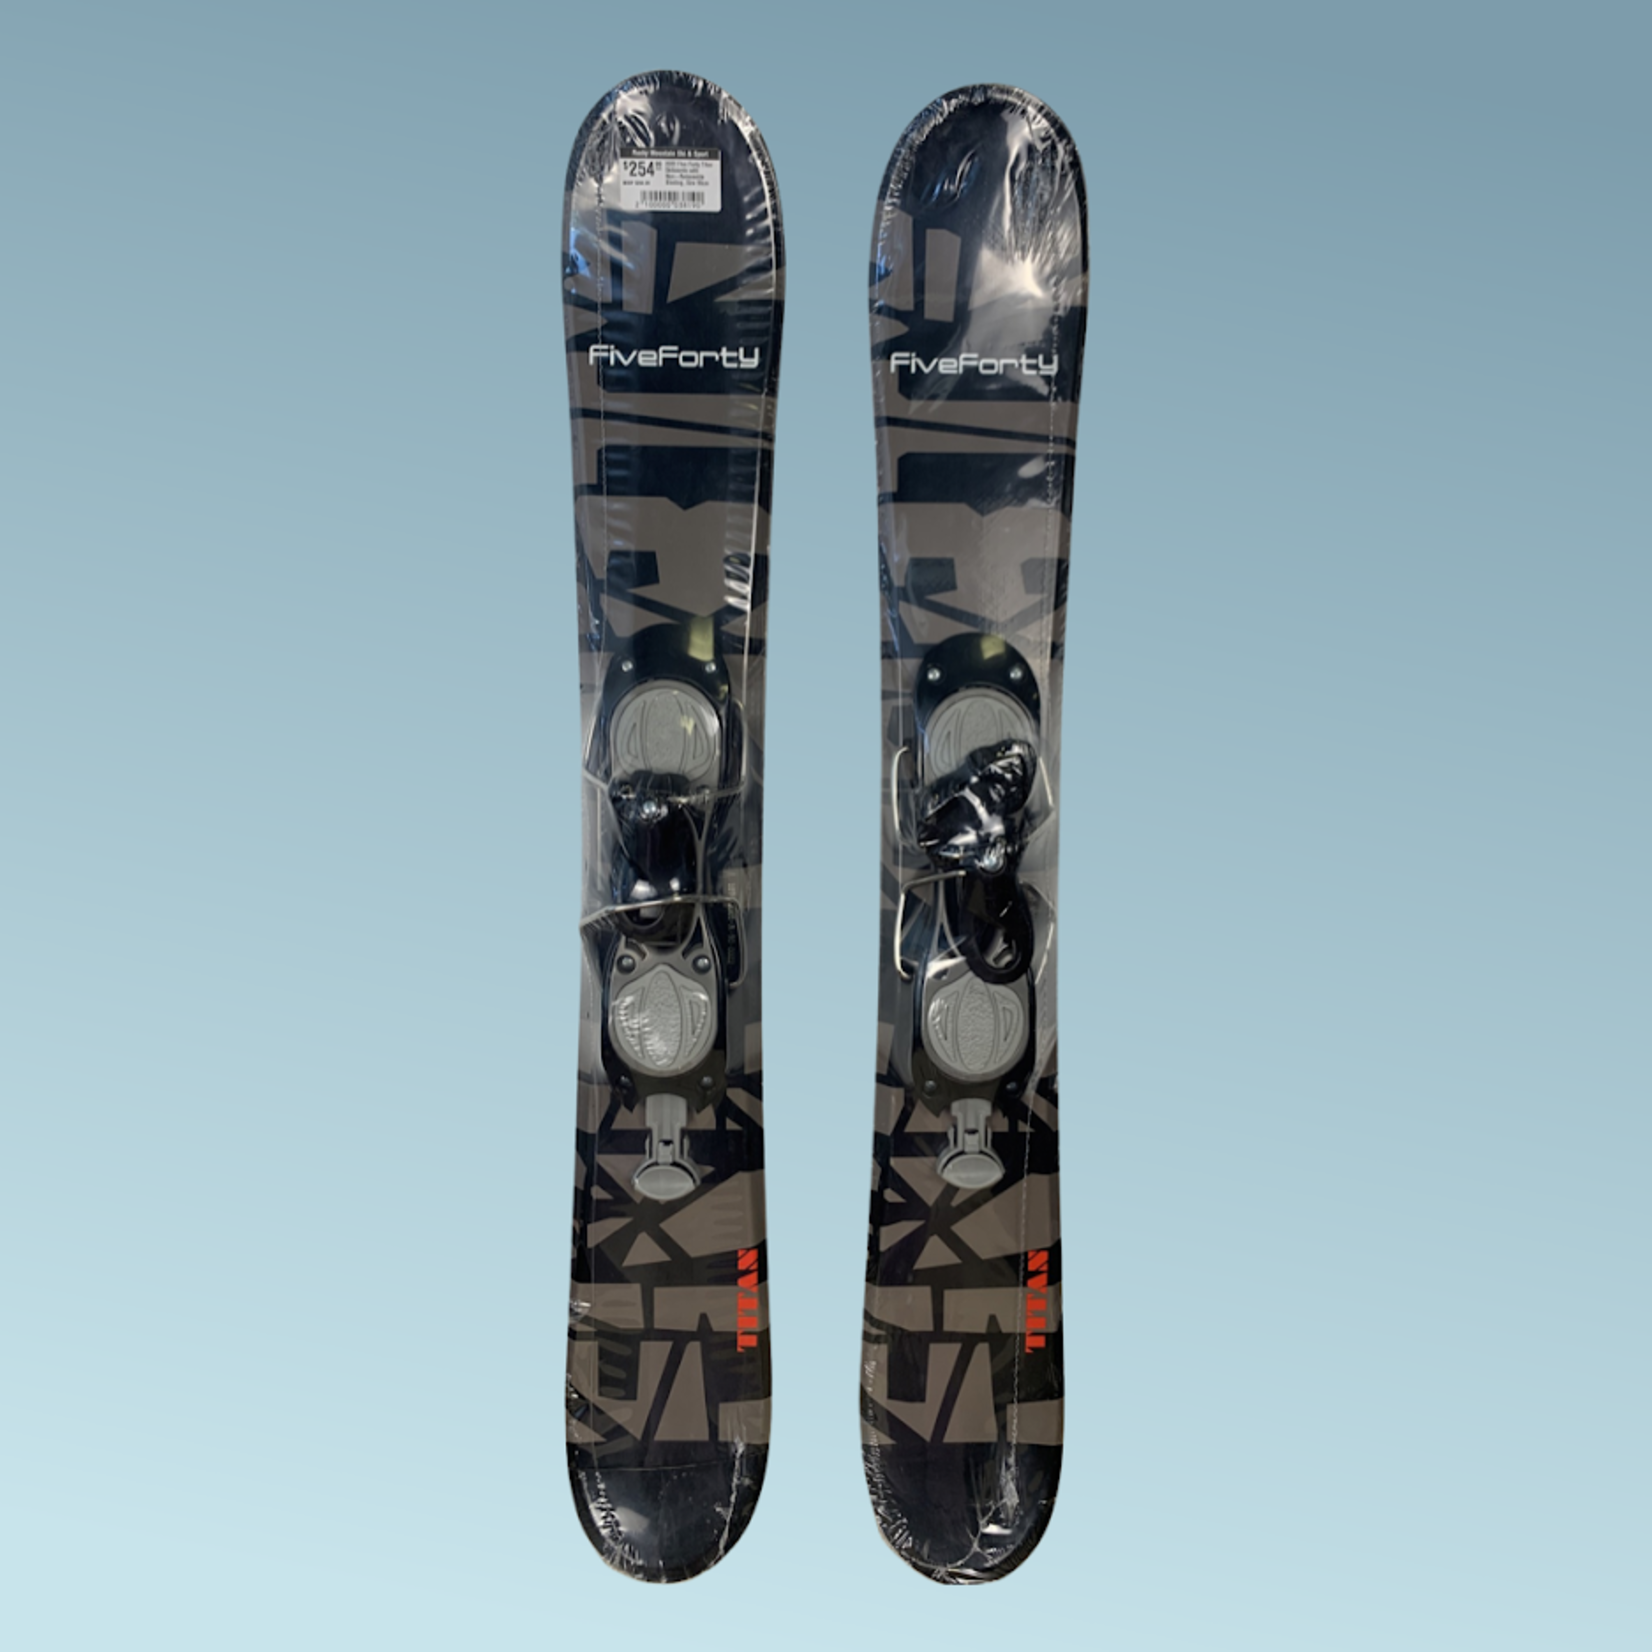 FiveForty NEW 2022 Five Forty Titan Skiboards with Non-Releasable Binding, Size 90cm